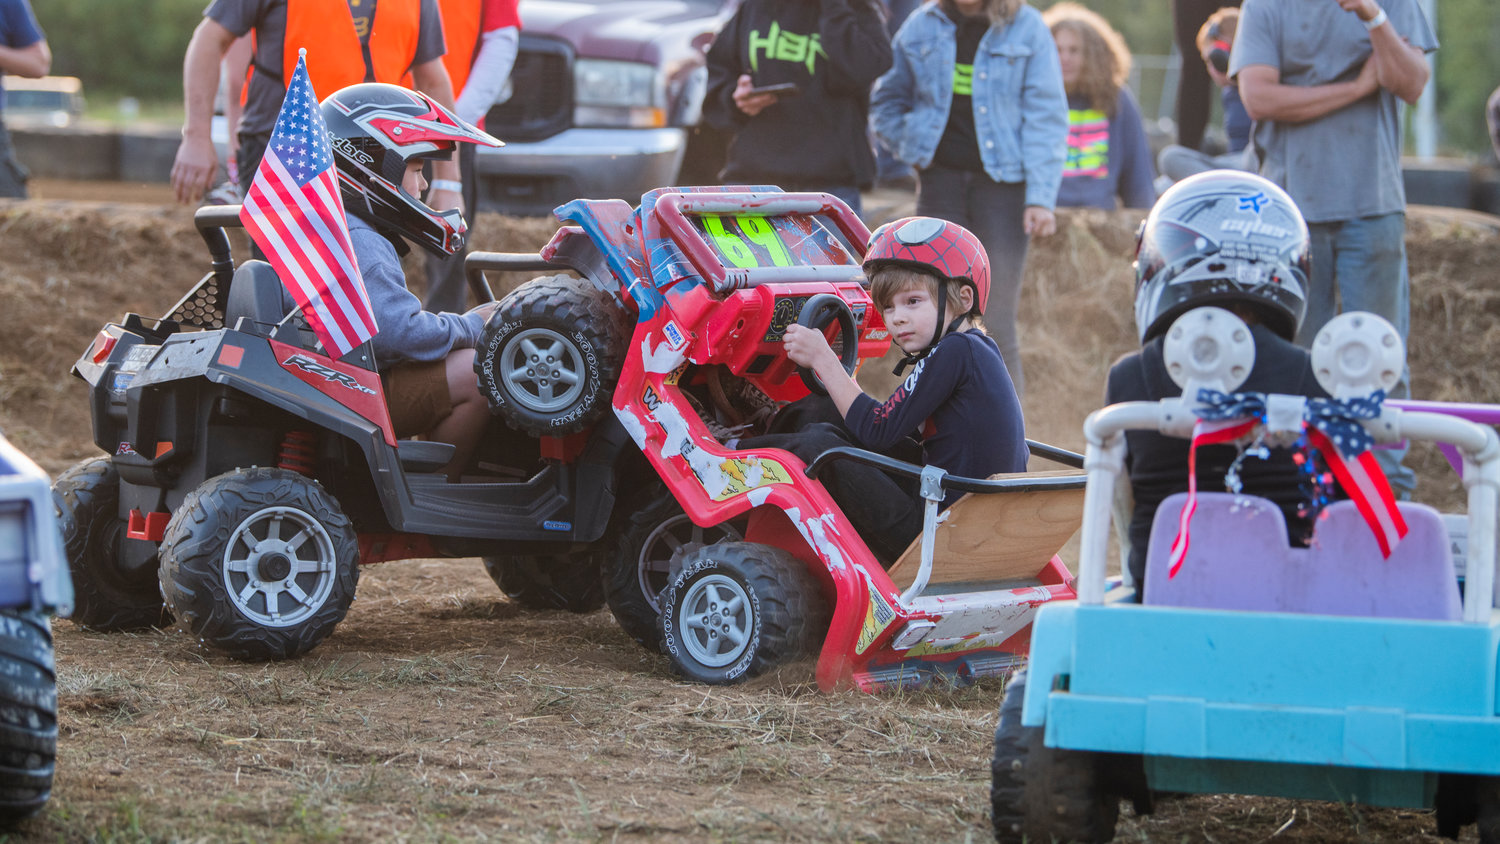 William Arnhold, 7, of Tacoma, wheelies into competition during the first-ever power wheels demolition derby for kids at the Southwest Washington Fairgrounds Sunday night in Centralia.